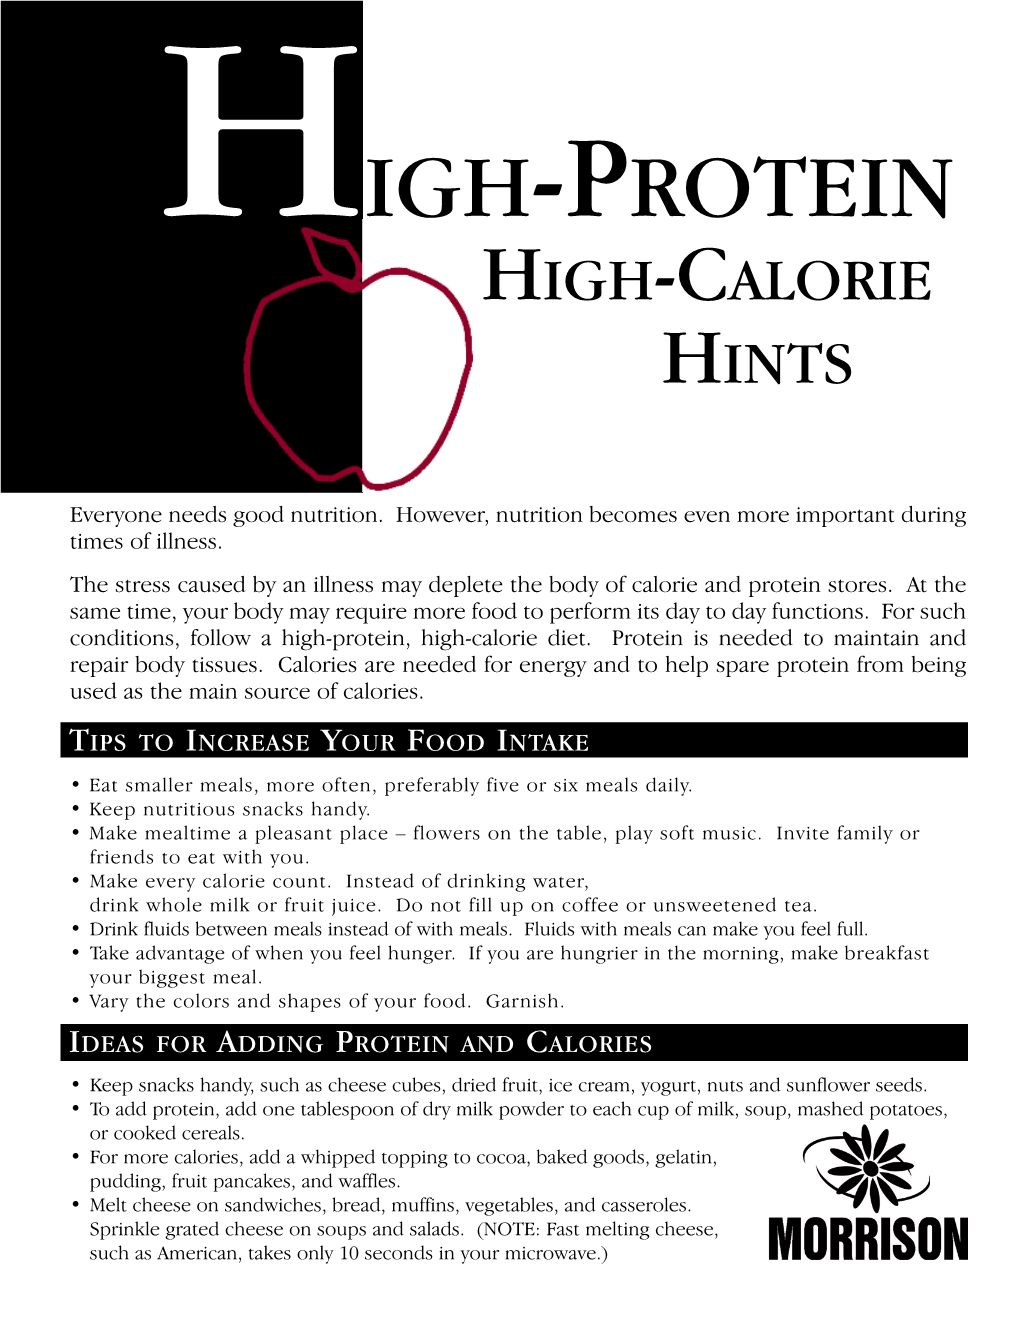 MHC-1011 High Protein High Calorie Hints.Qxd